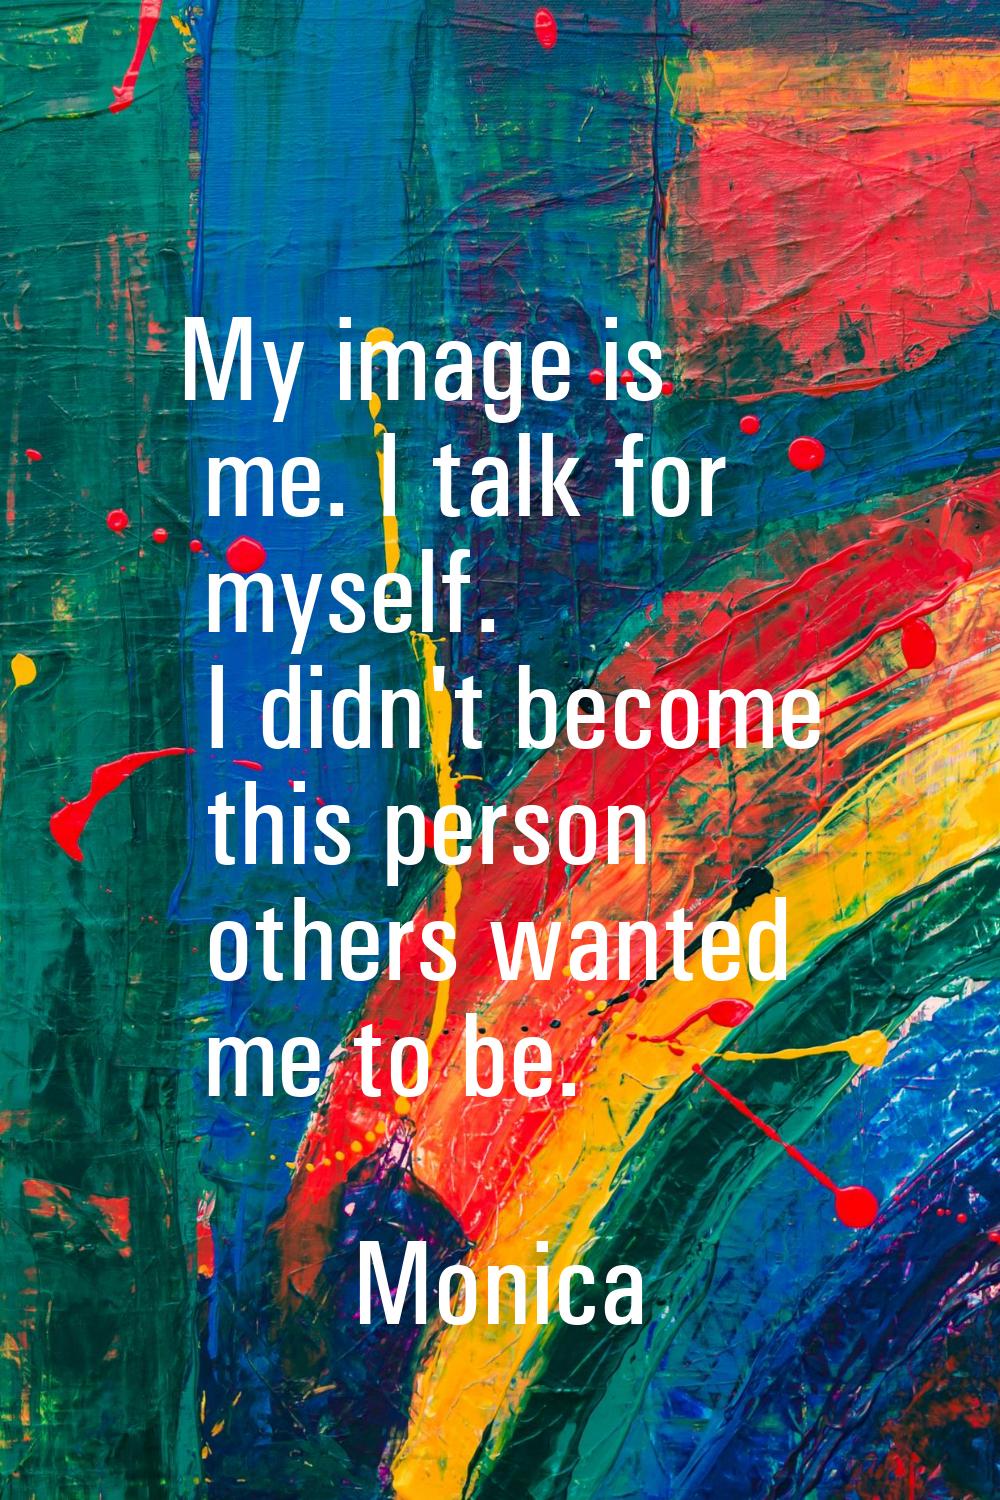 My image is me. I talk for myself. I didn't become this person others wanted me to be.